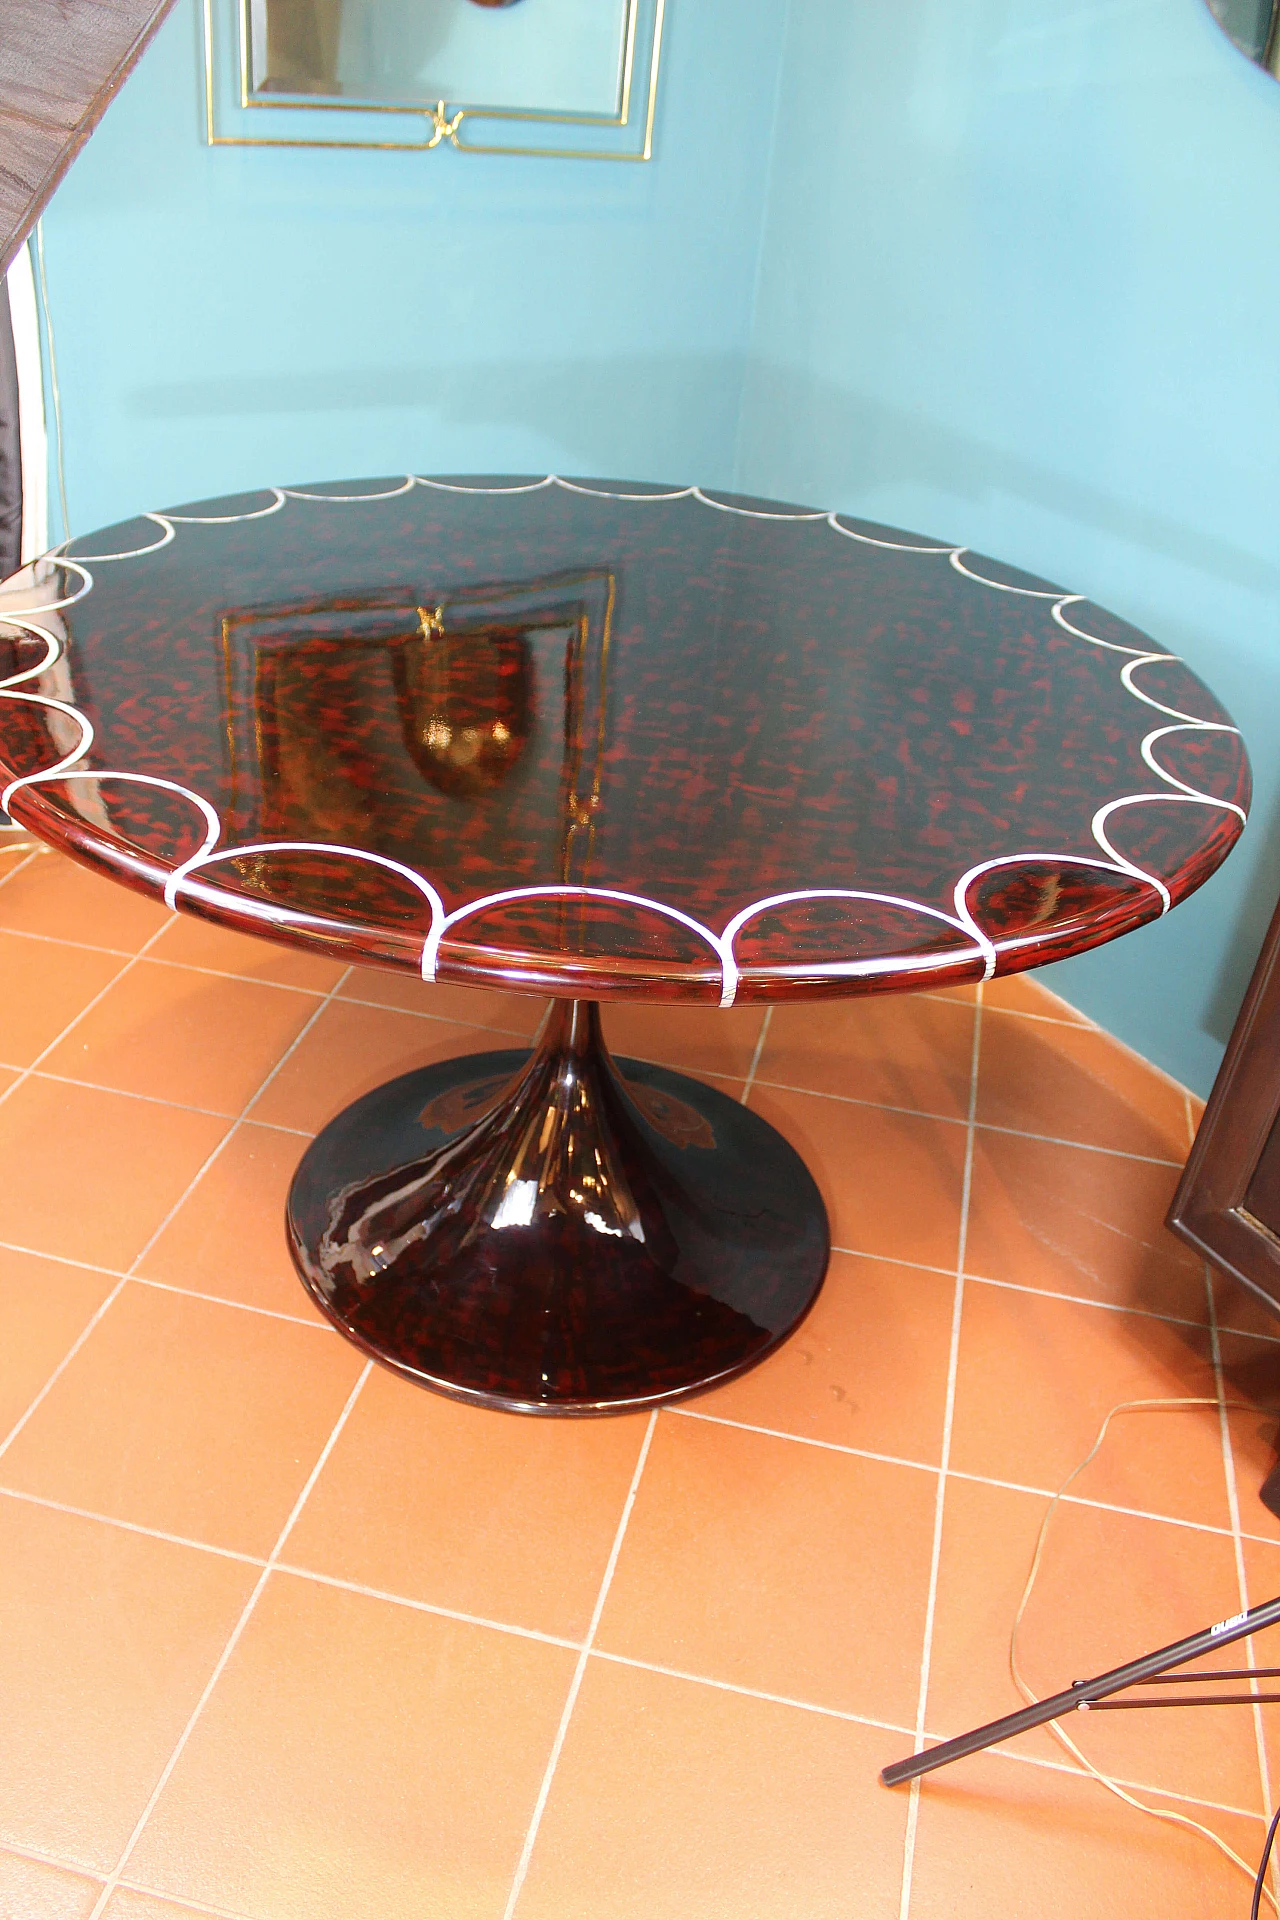 Turtle lacquered mahogany round table with mother-of-pearl inlays 1074153